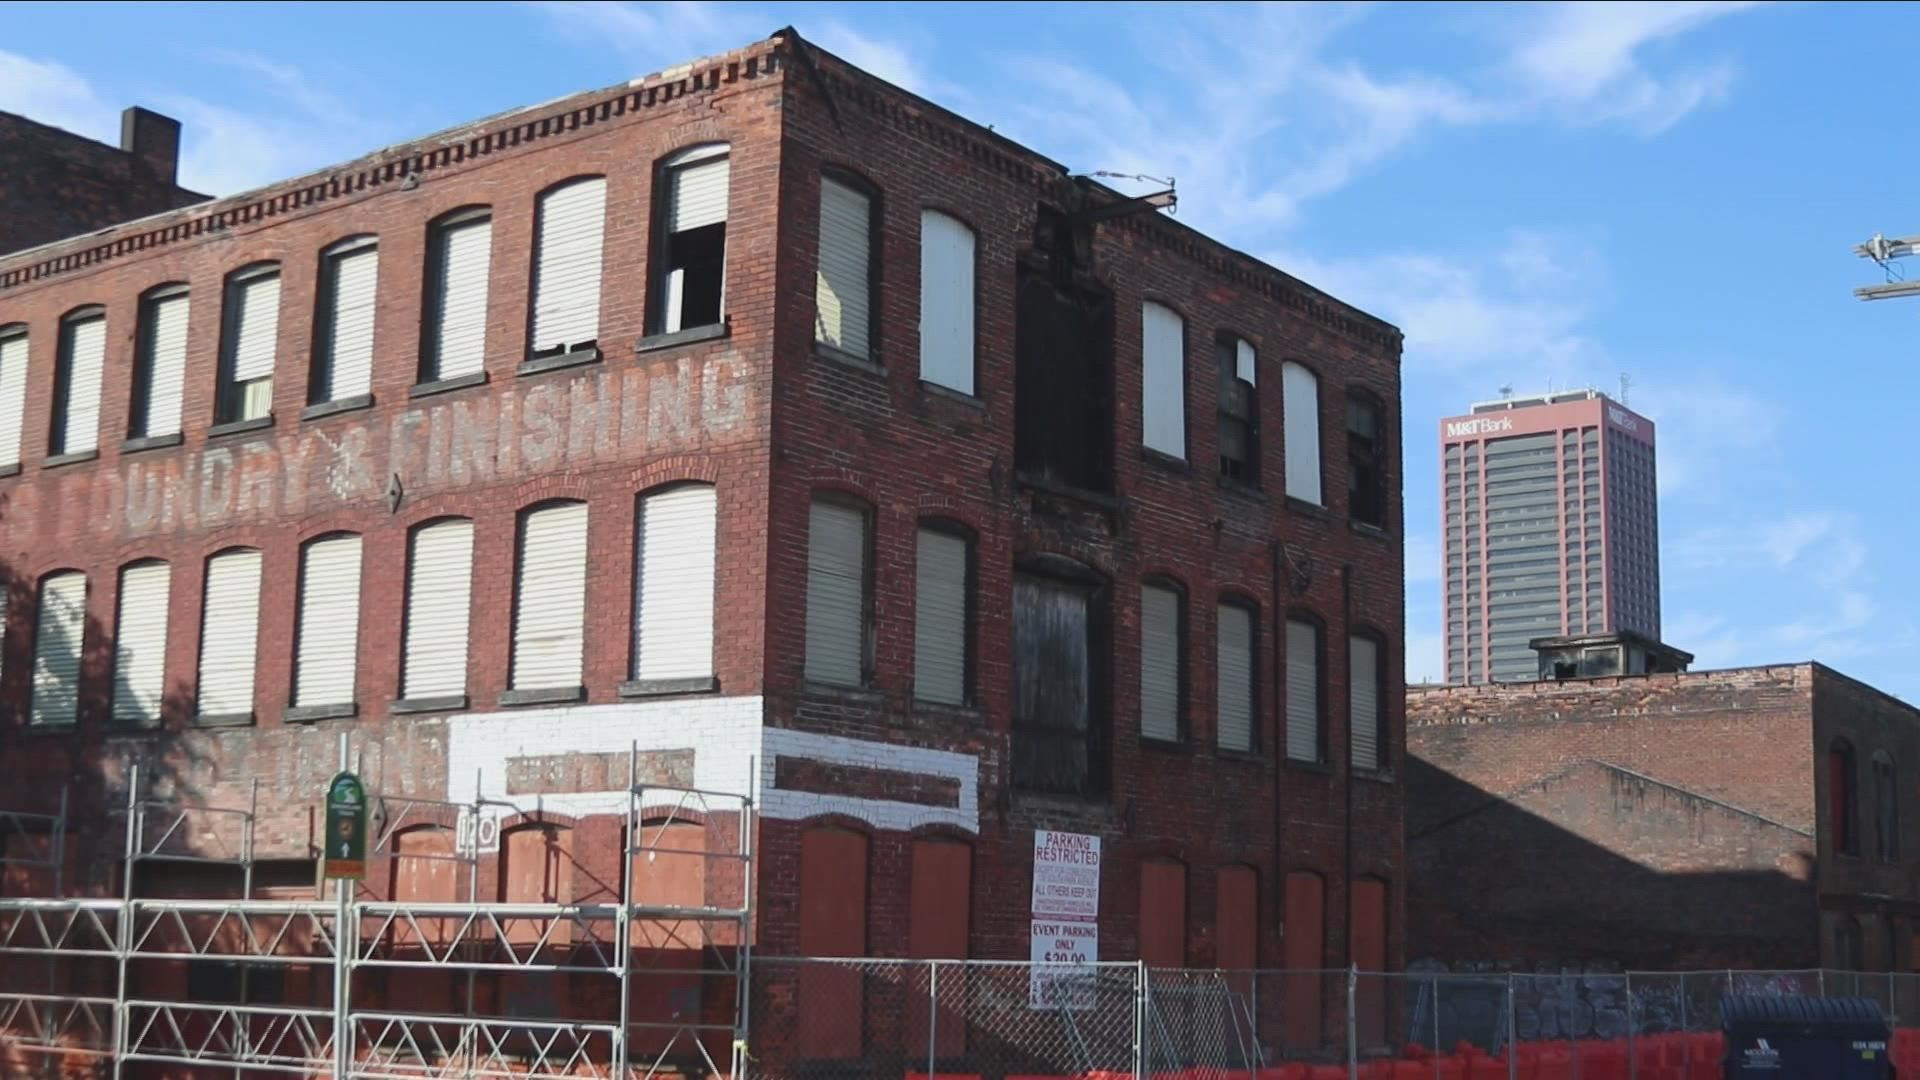 Even though a public hearing will be the next phase in an eminent domain procedure for two Cobblestone District buildings, but the owner has big plans for the site.